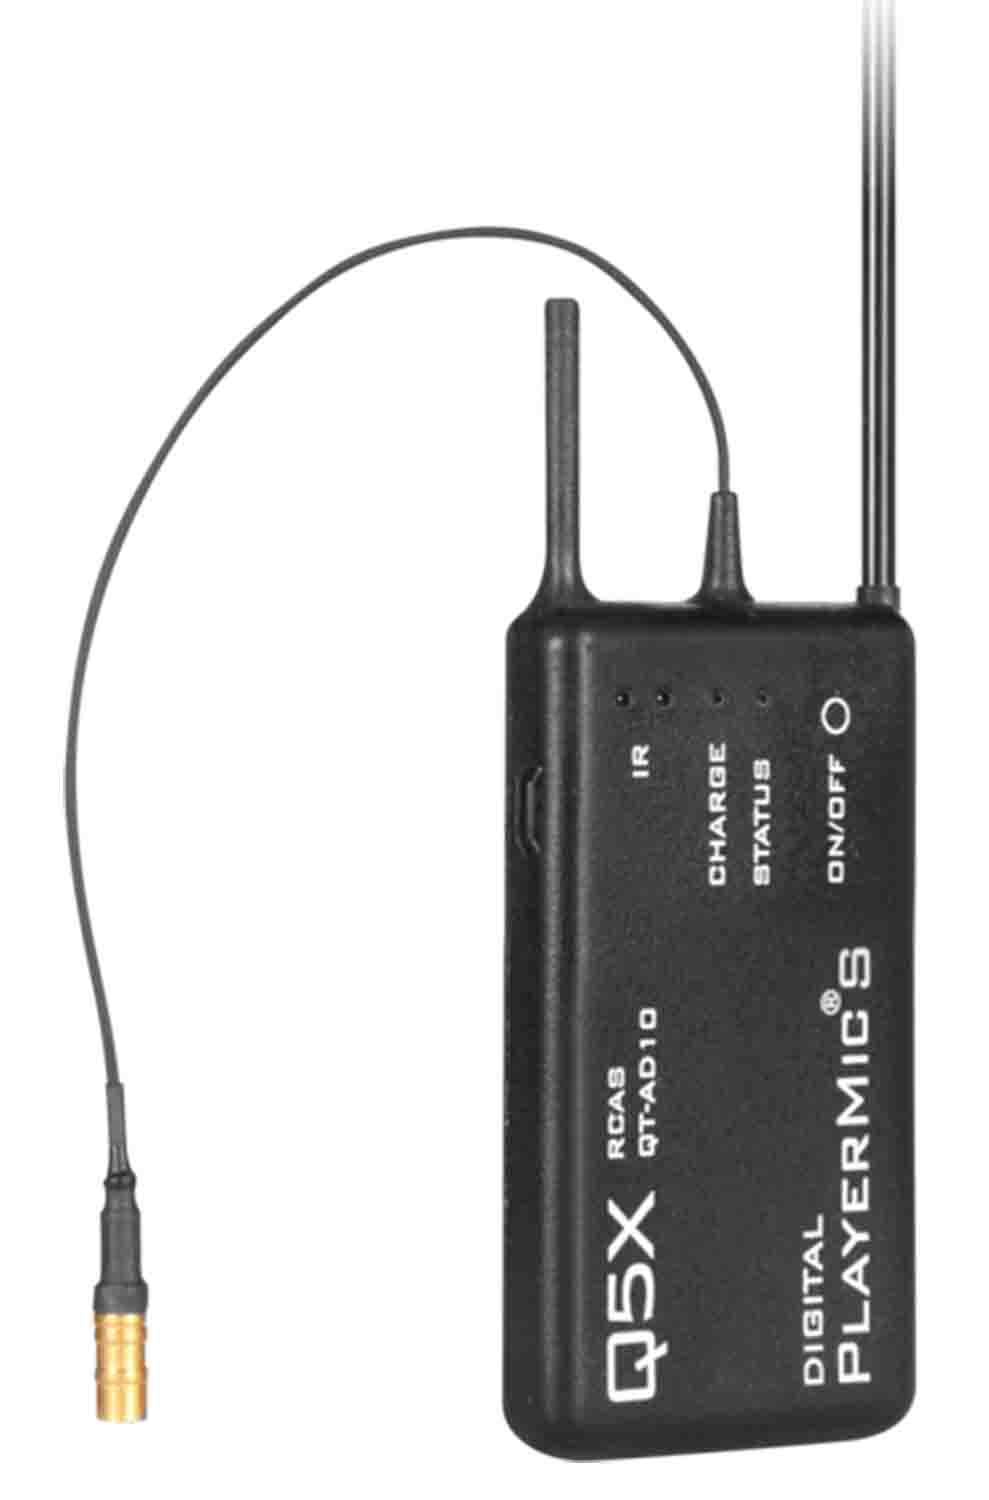 Shure QTAD10PS PlayerMic Short Flexible Rubber Bodypack Transmitter with Q5X - Hollywood DJ